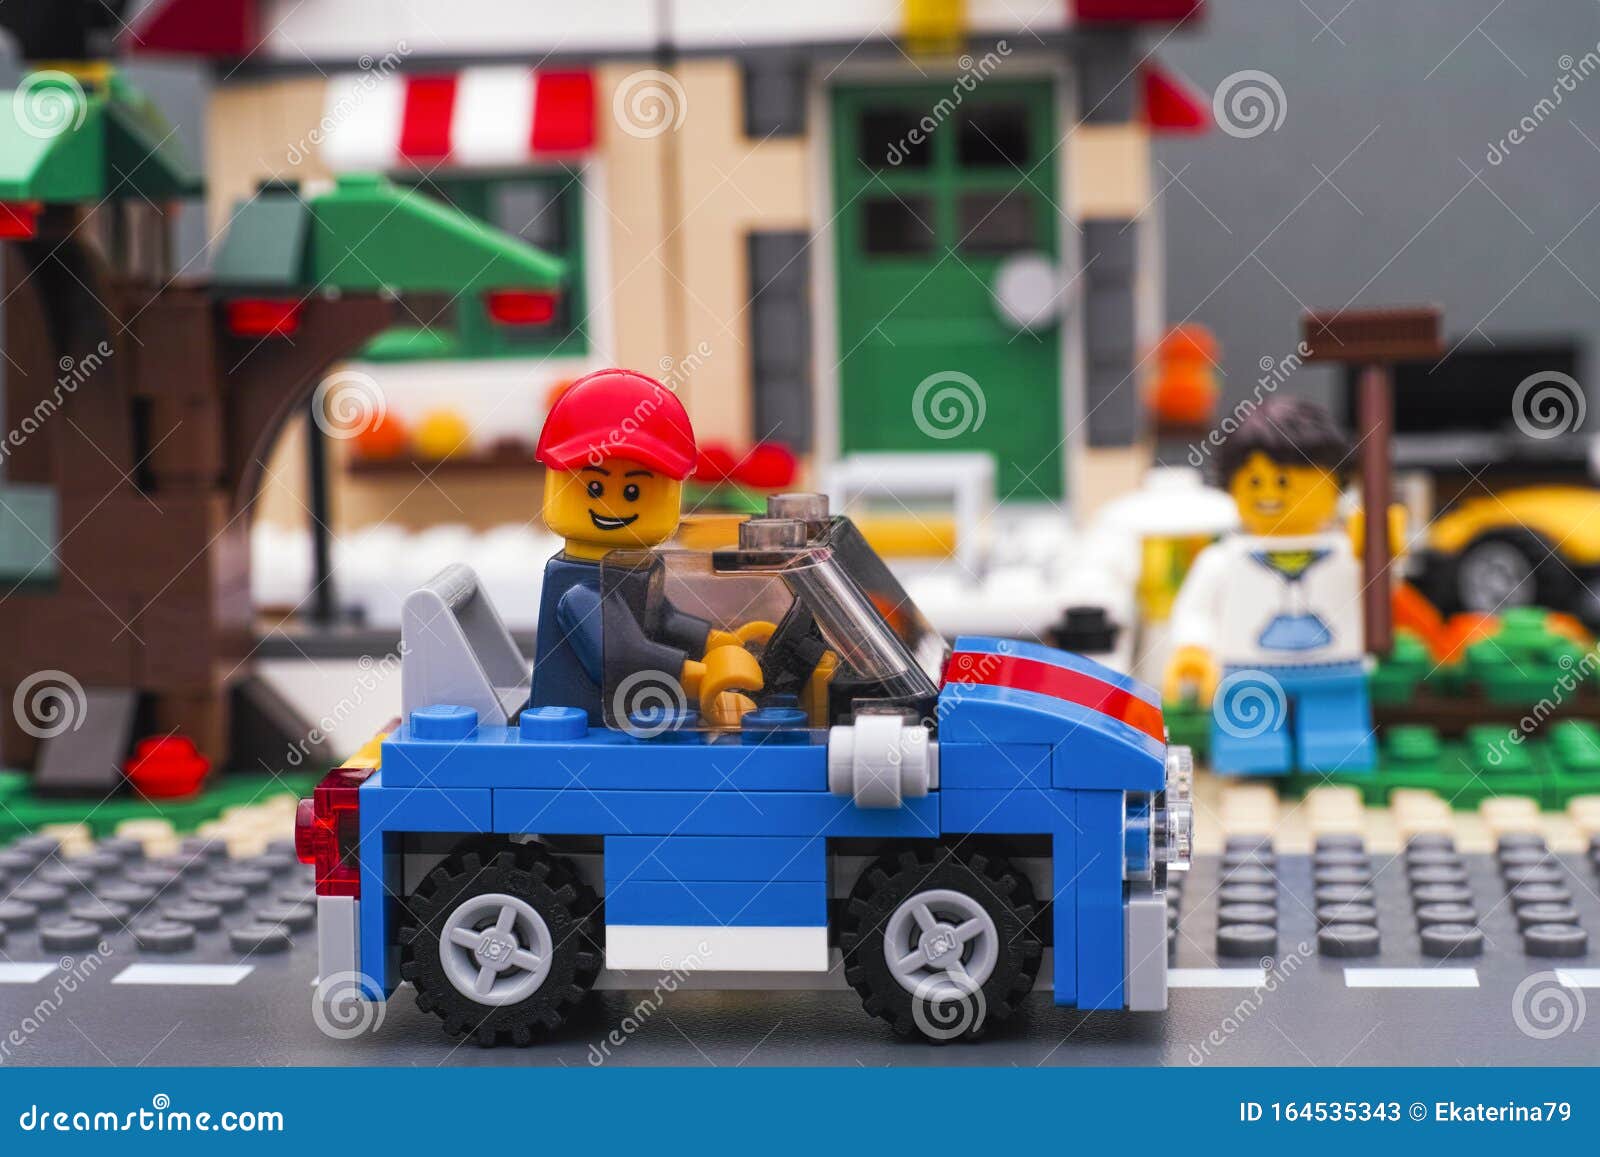 Lego Man Sitting in Blue Car on Road in Front of House Editorial Stock ...